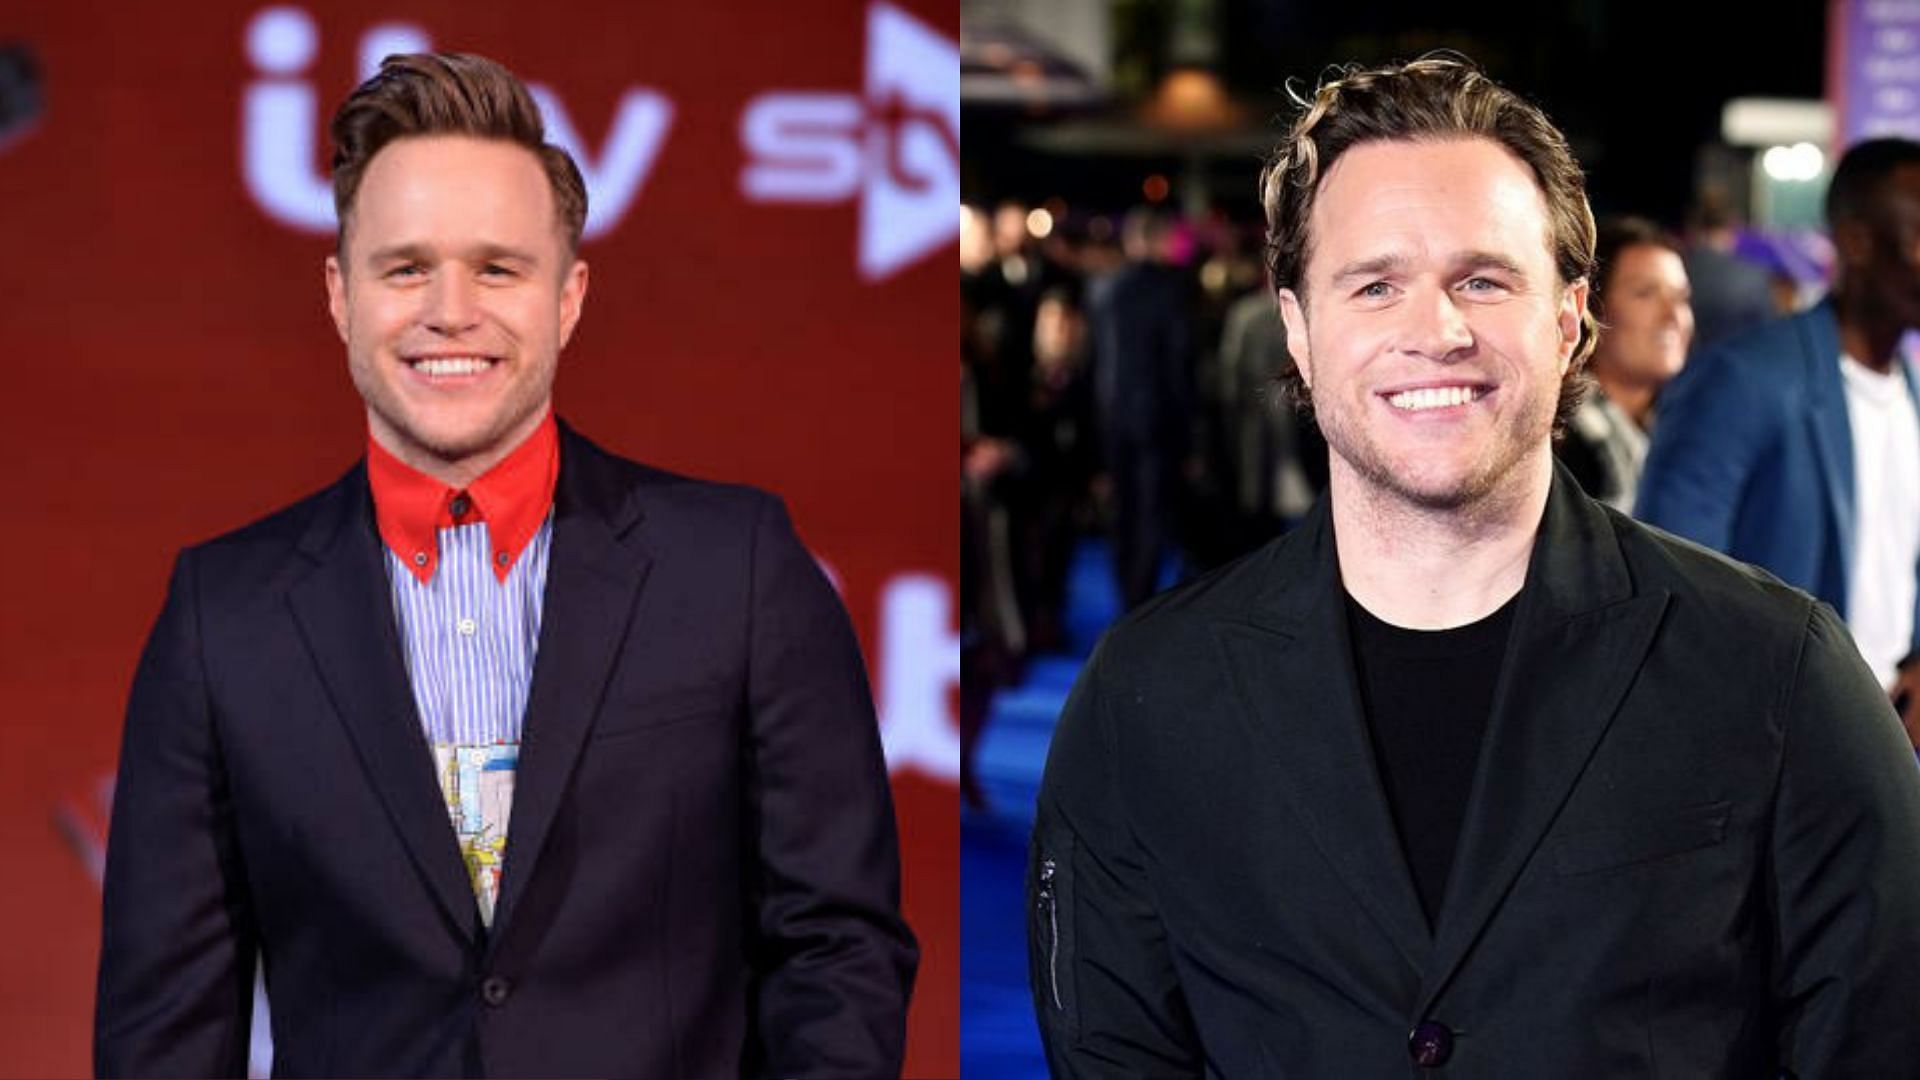 Singer Olly Murs forced to cancel tour (Images via Getty)